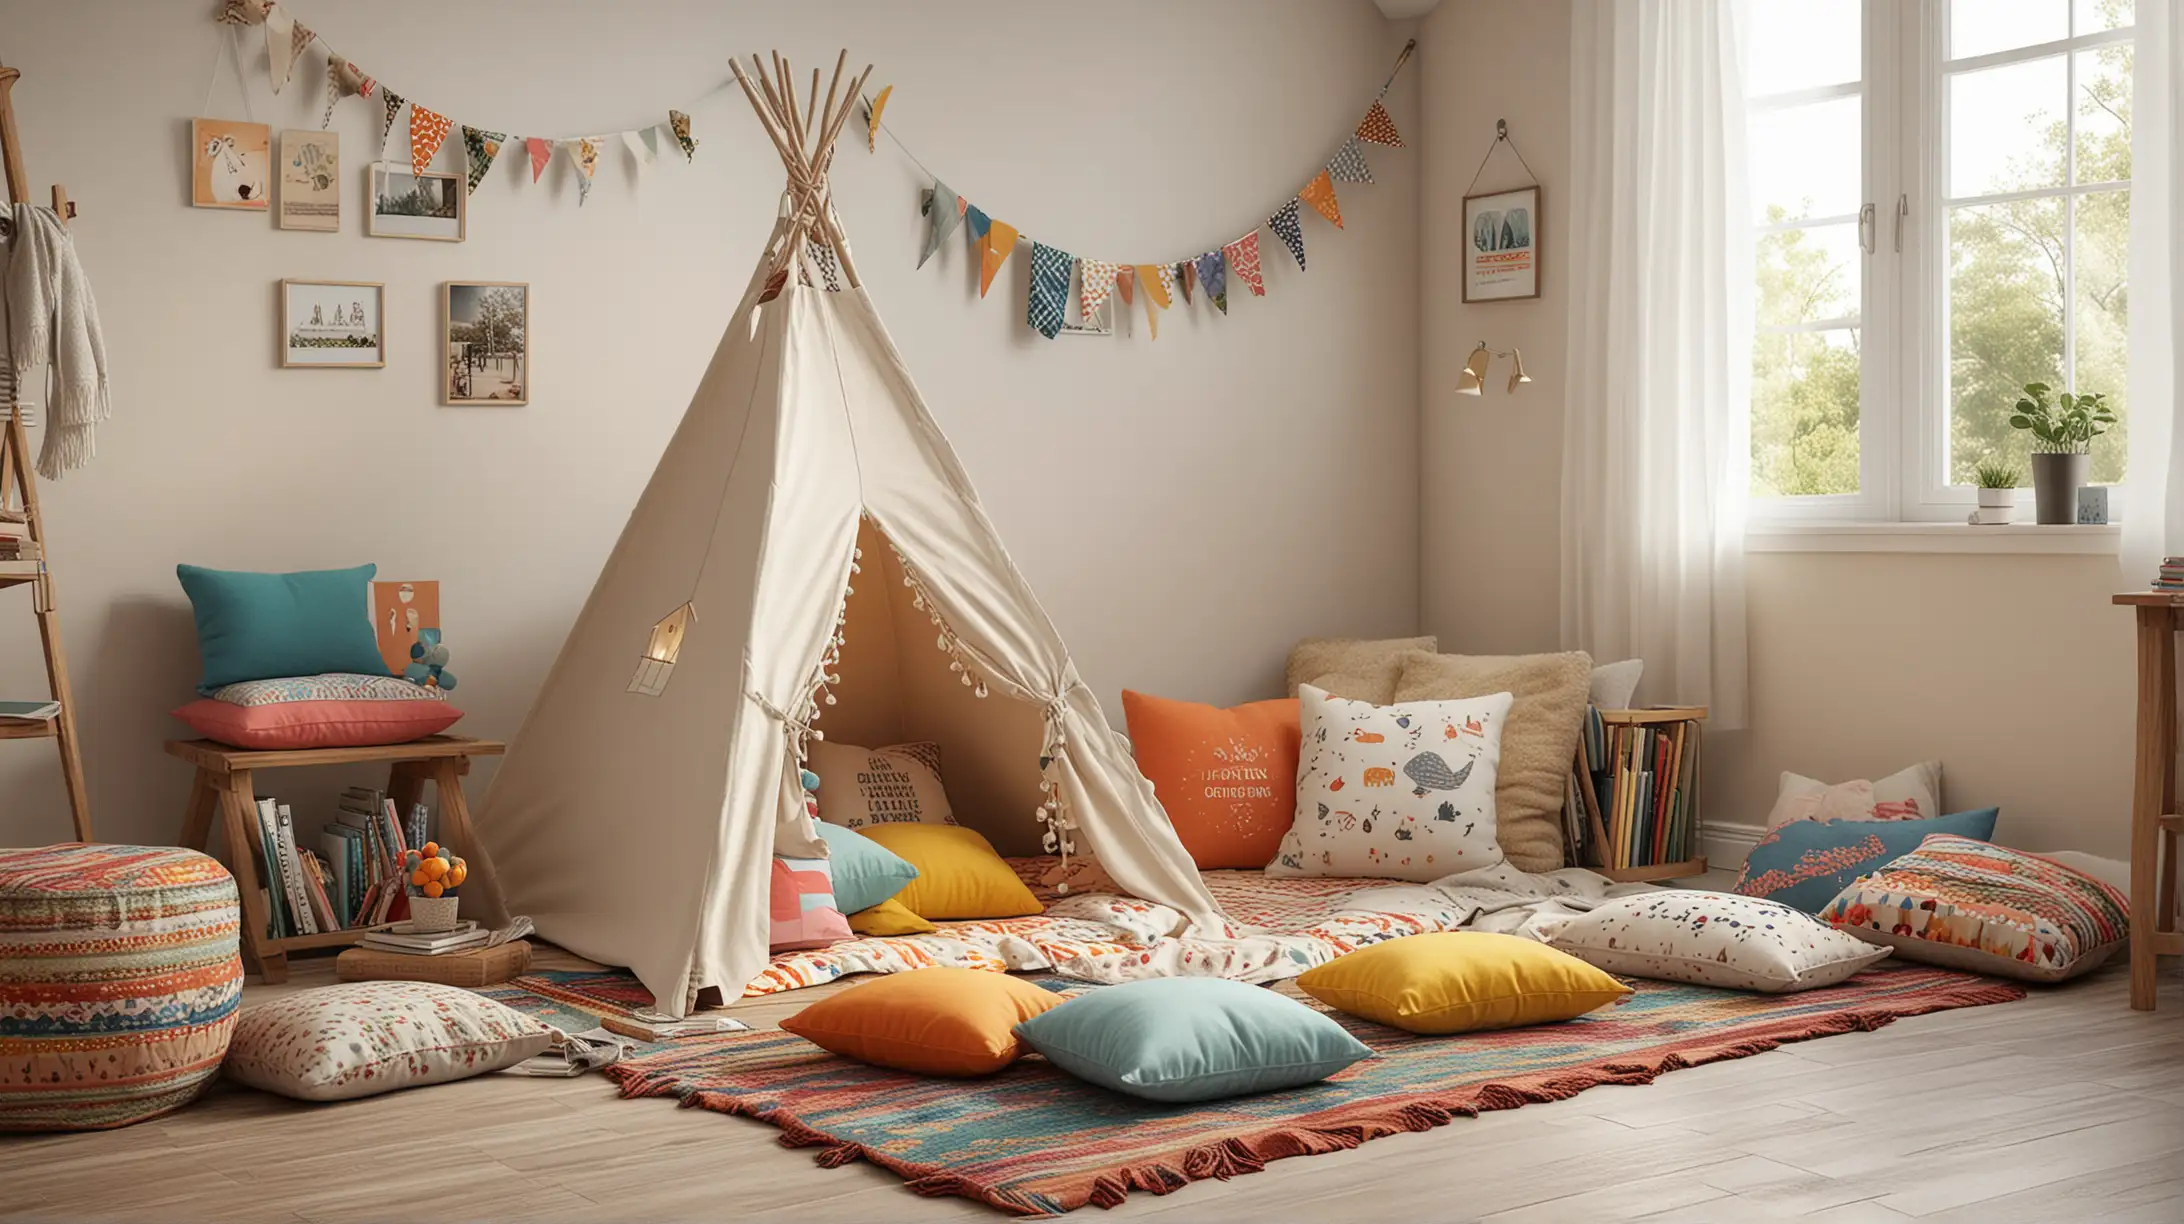 create a hyper realistic image of a fun and cozy reading nook for kids, a teepee, many cute and colourful floor cushions, soft blankets, and throw pillows, full of natural lights